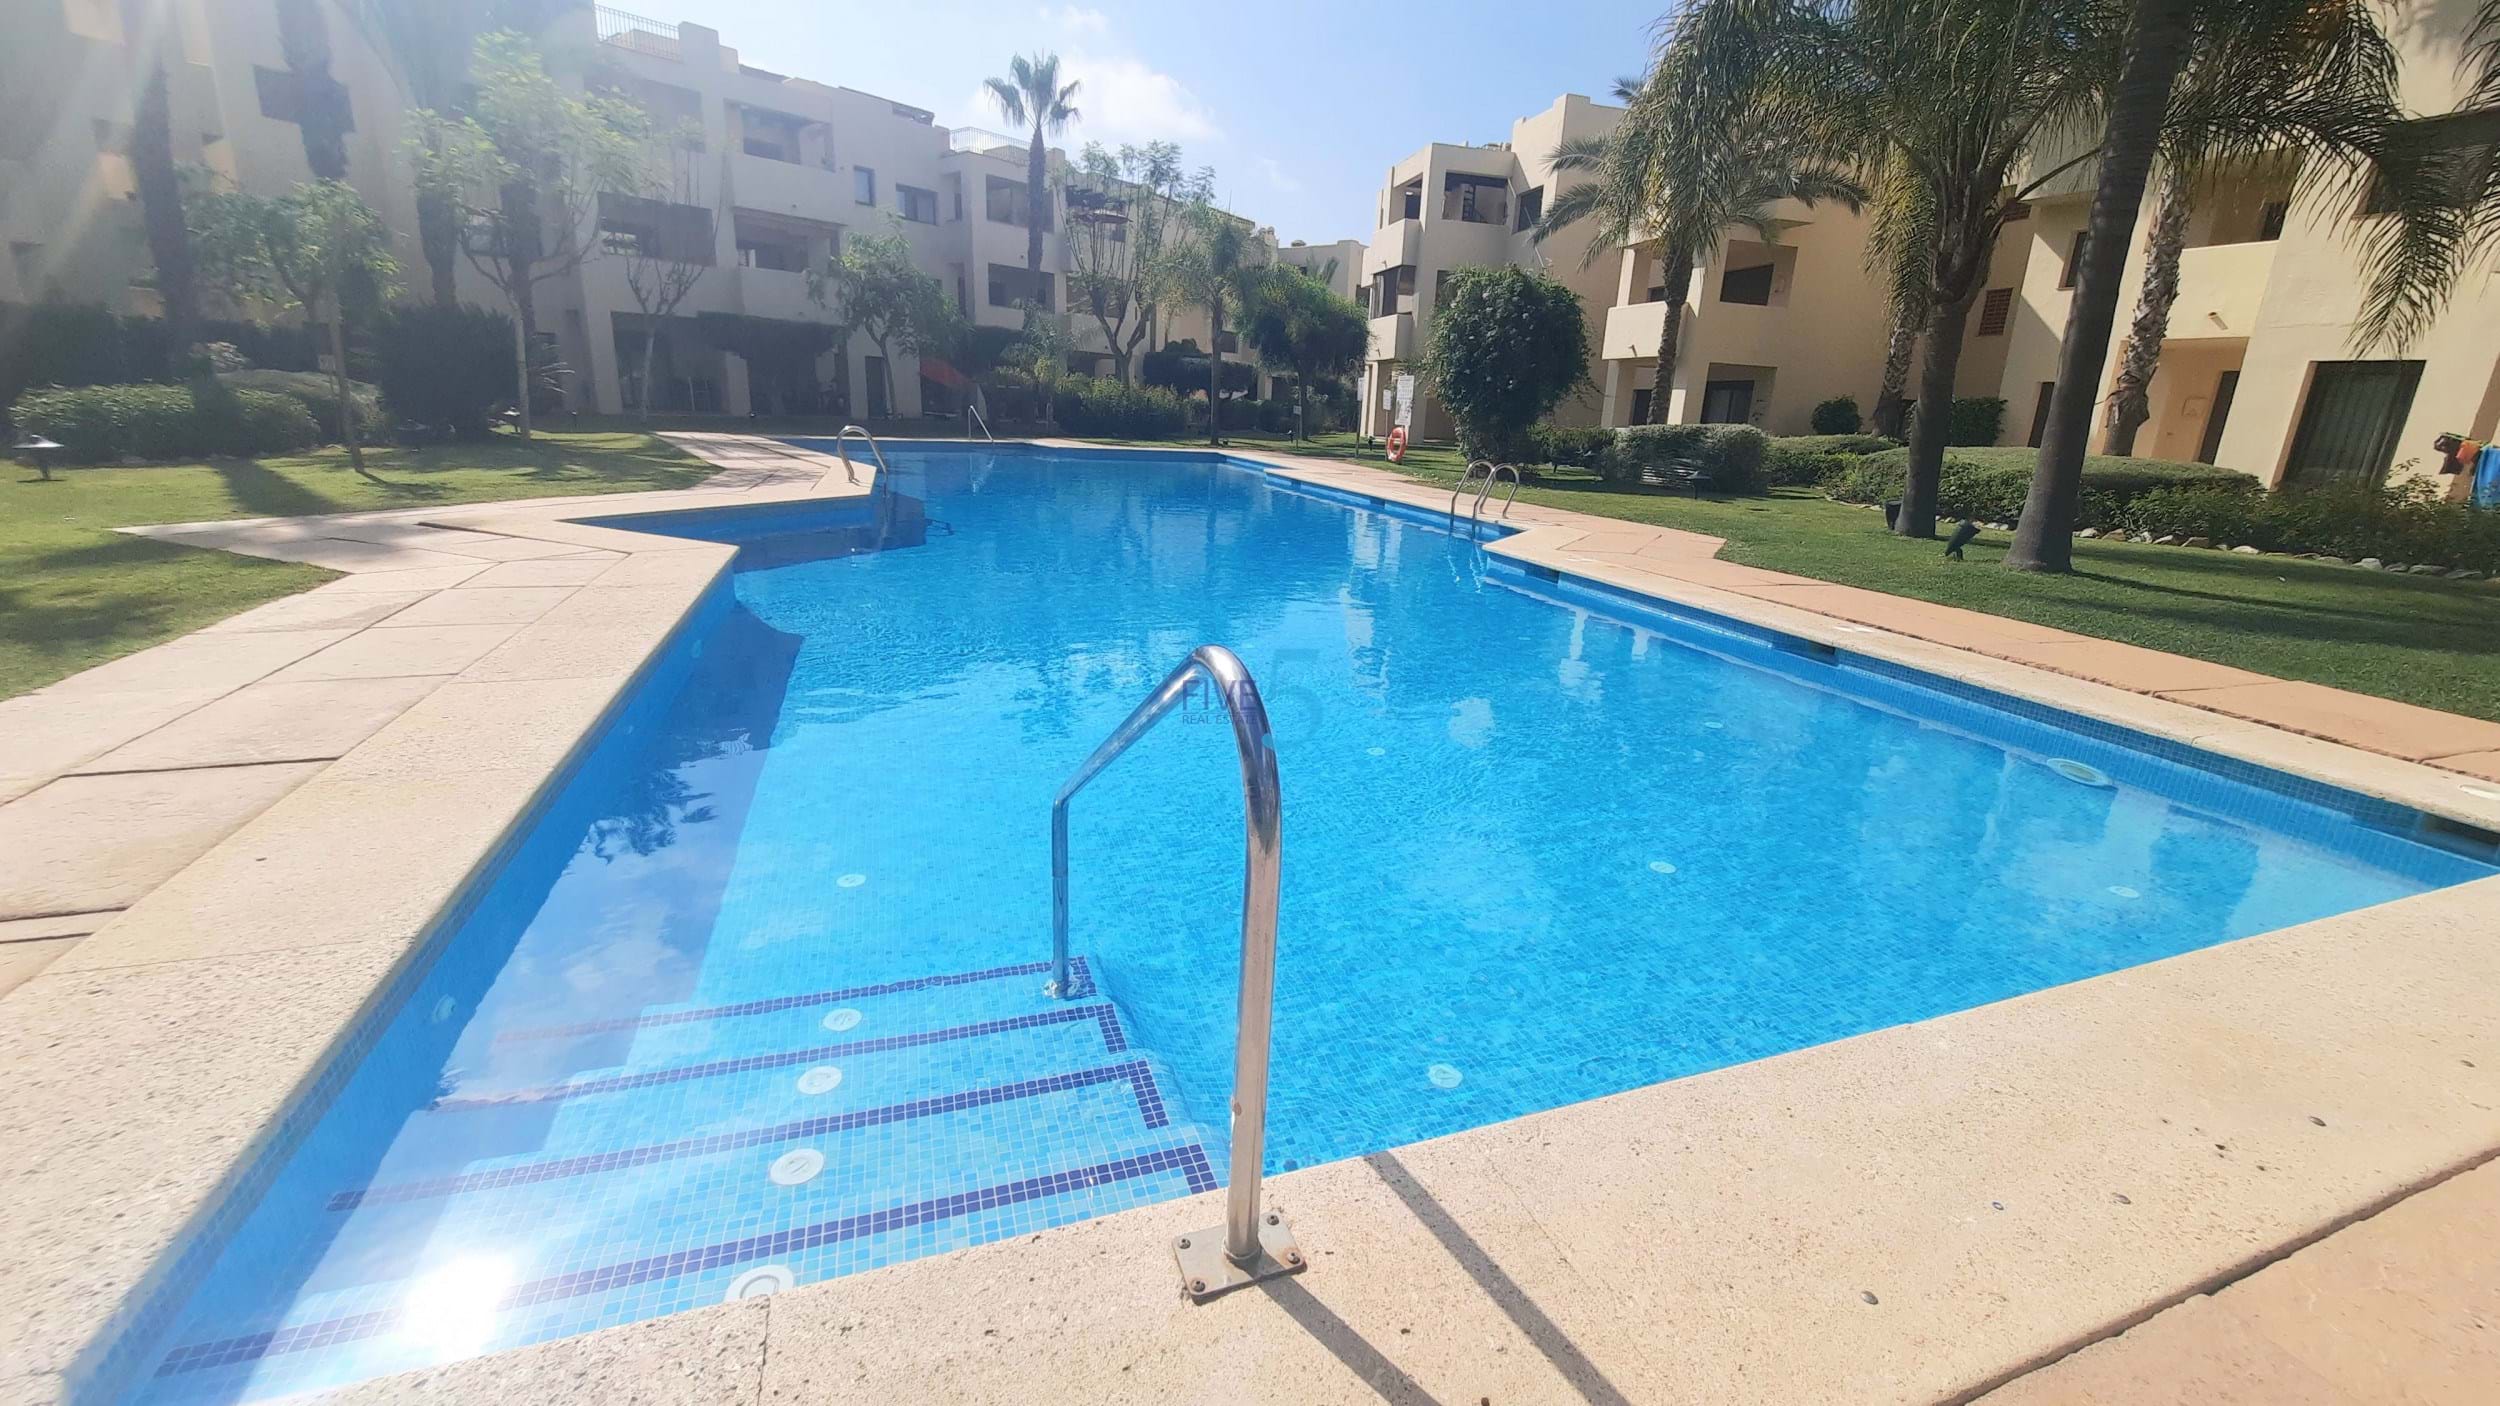 Apartment for sale in San Pedro del Pinatar and San Javier 27